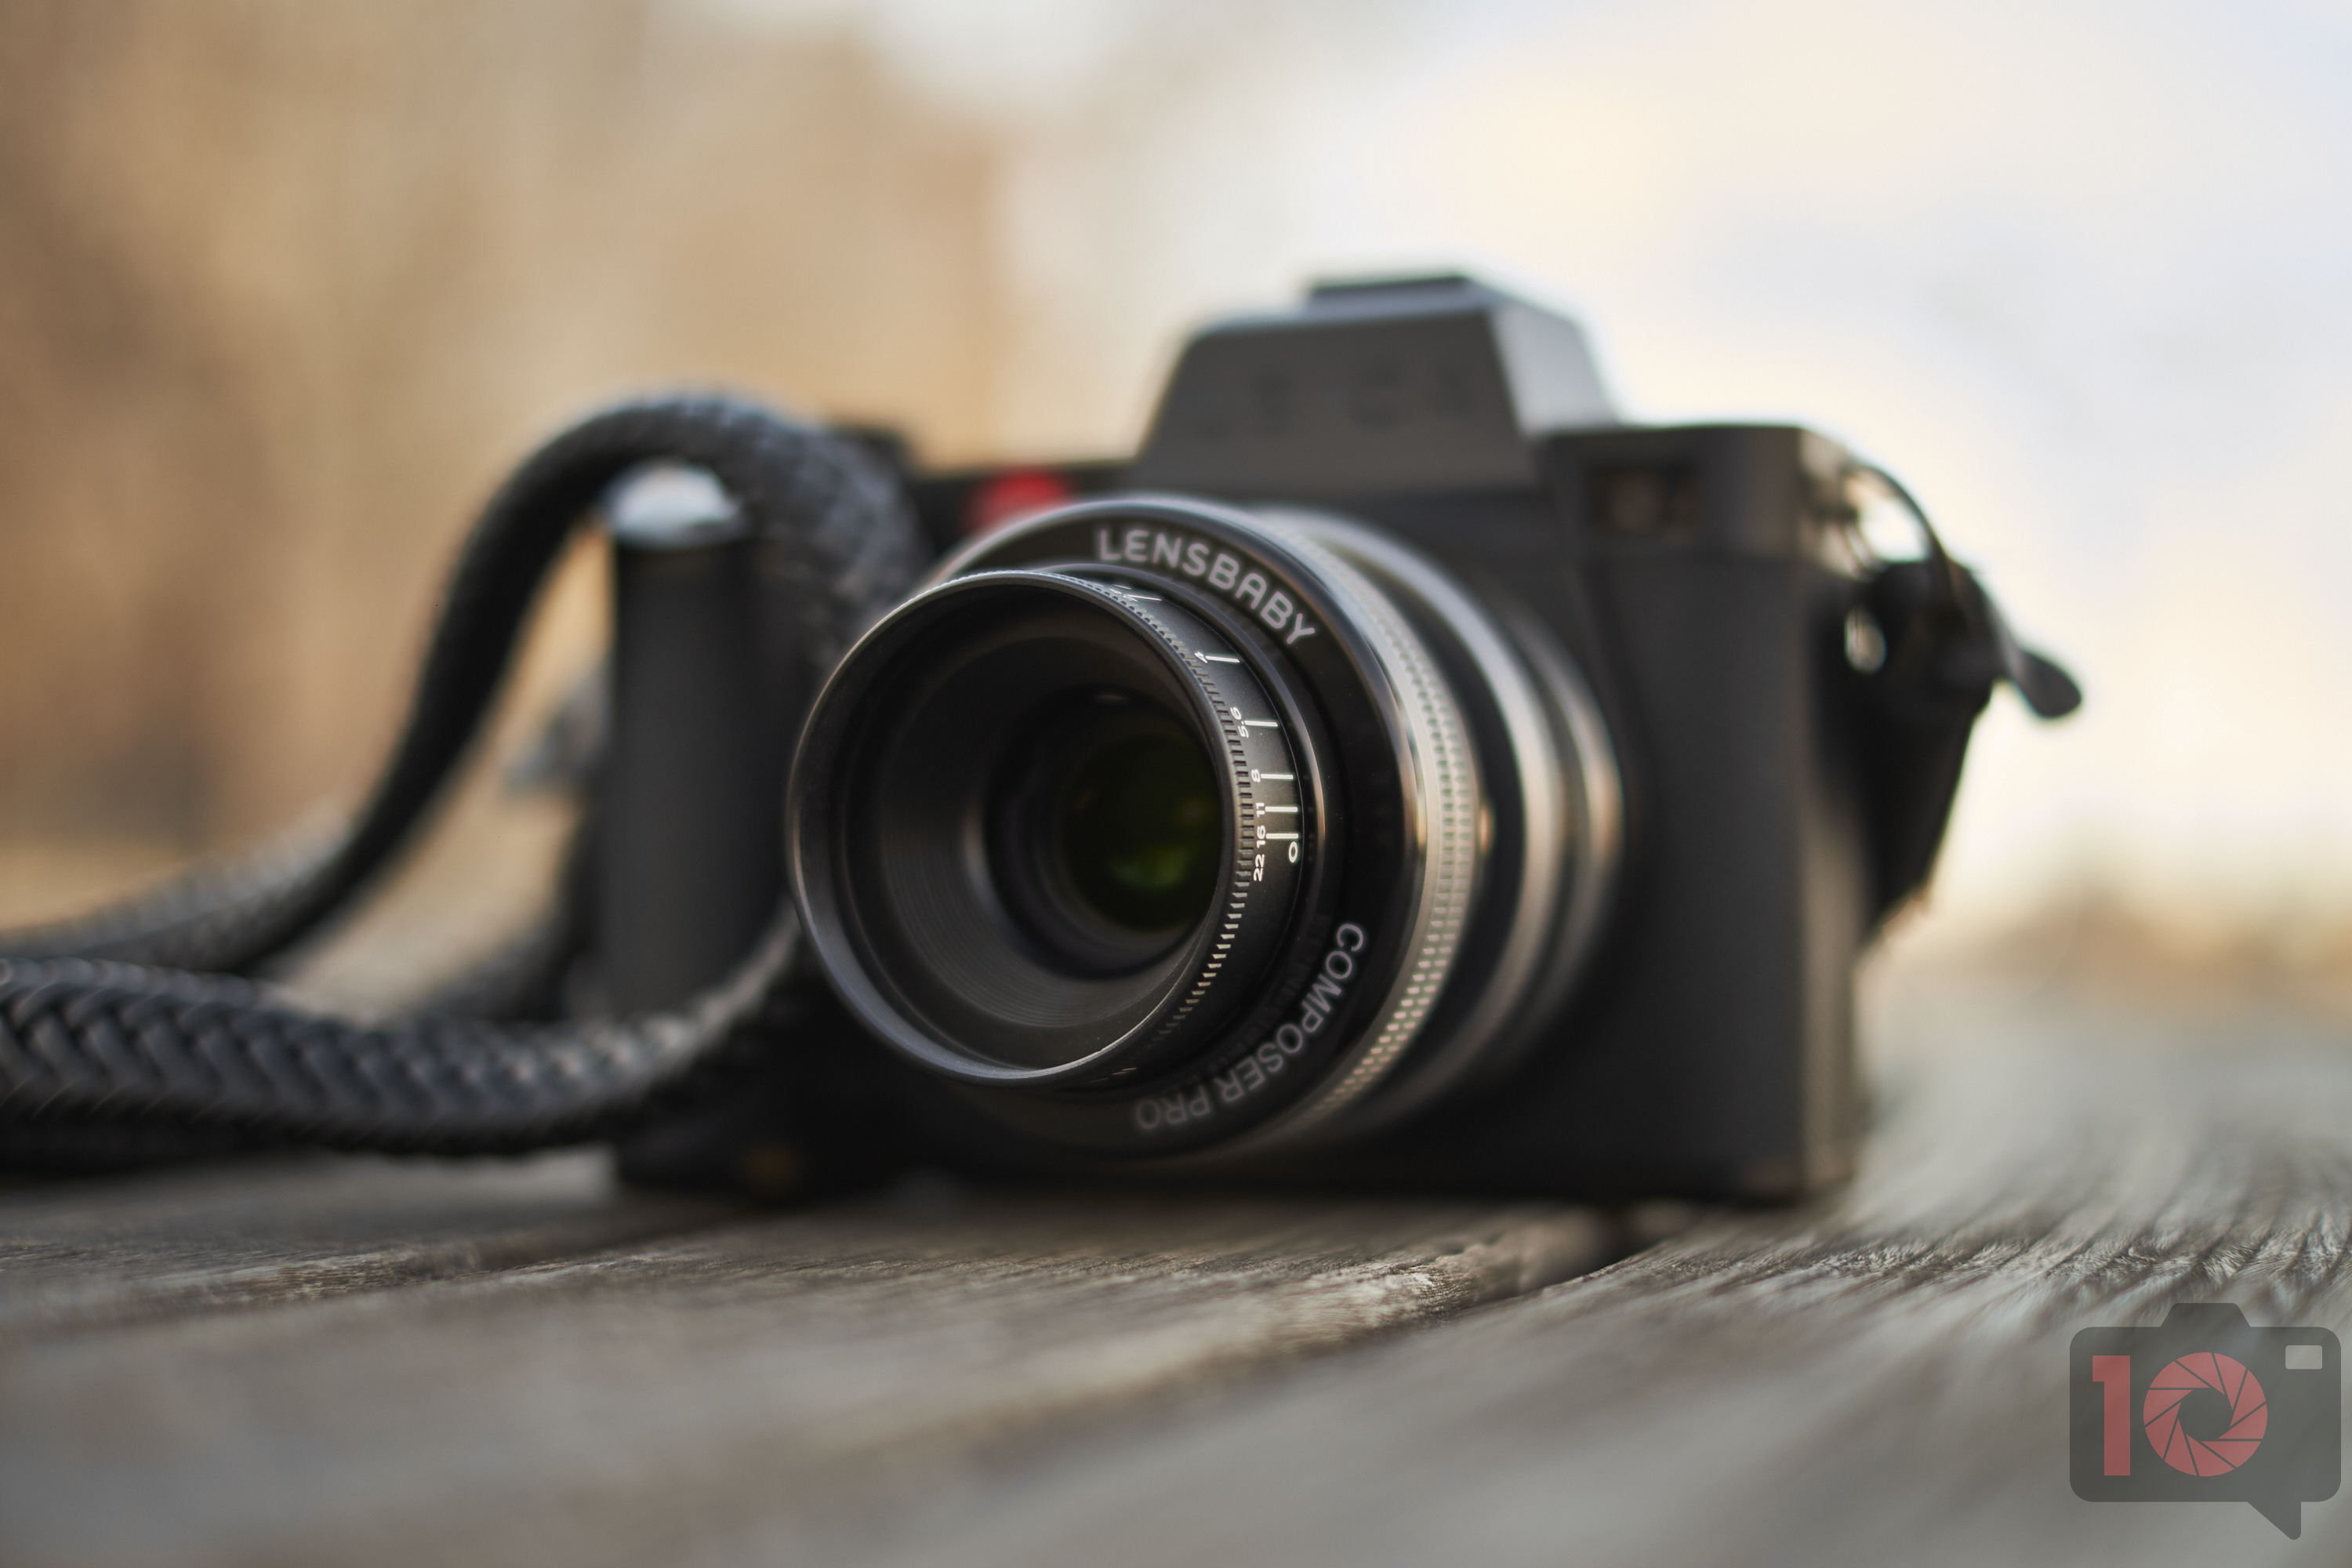 Chris Gampat The Phoblographer Lensbaby 35 Soft Focus Optic review product images 1.41-1000s400